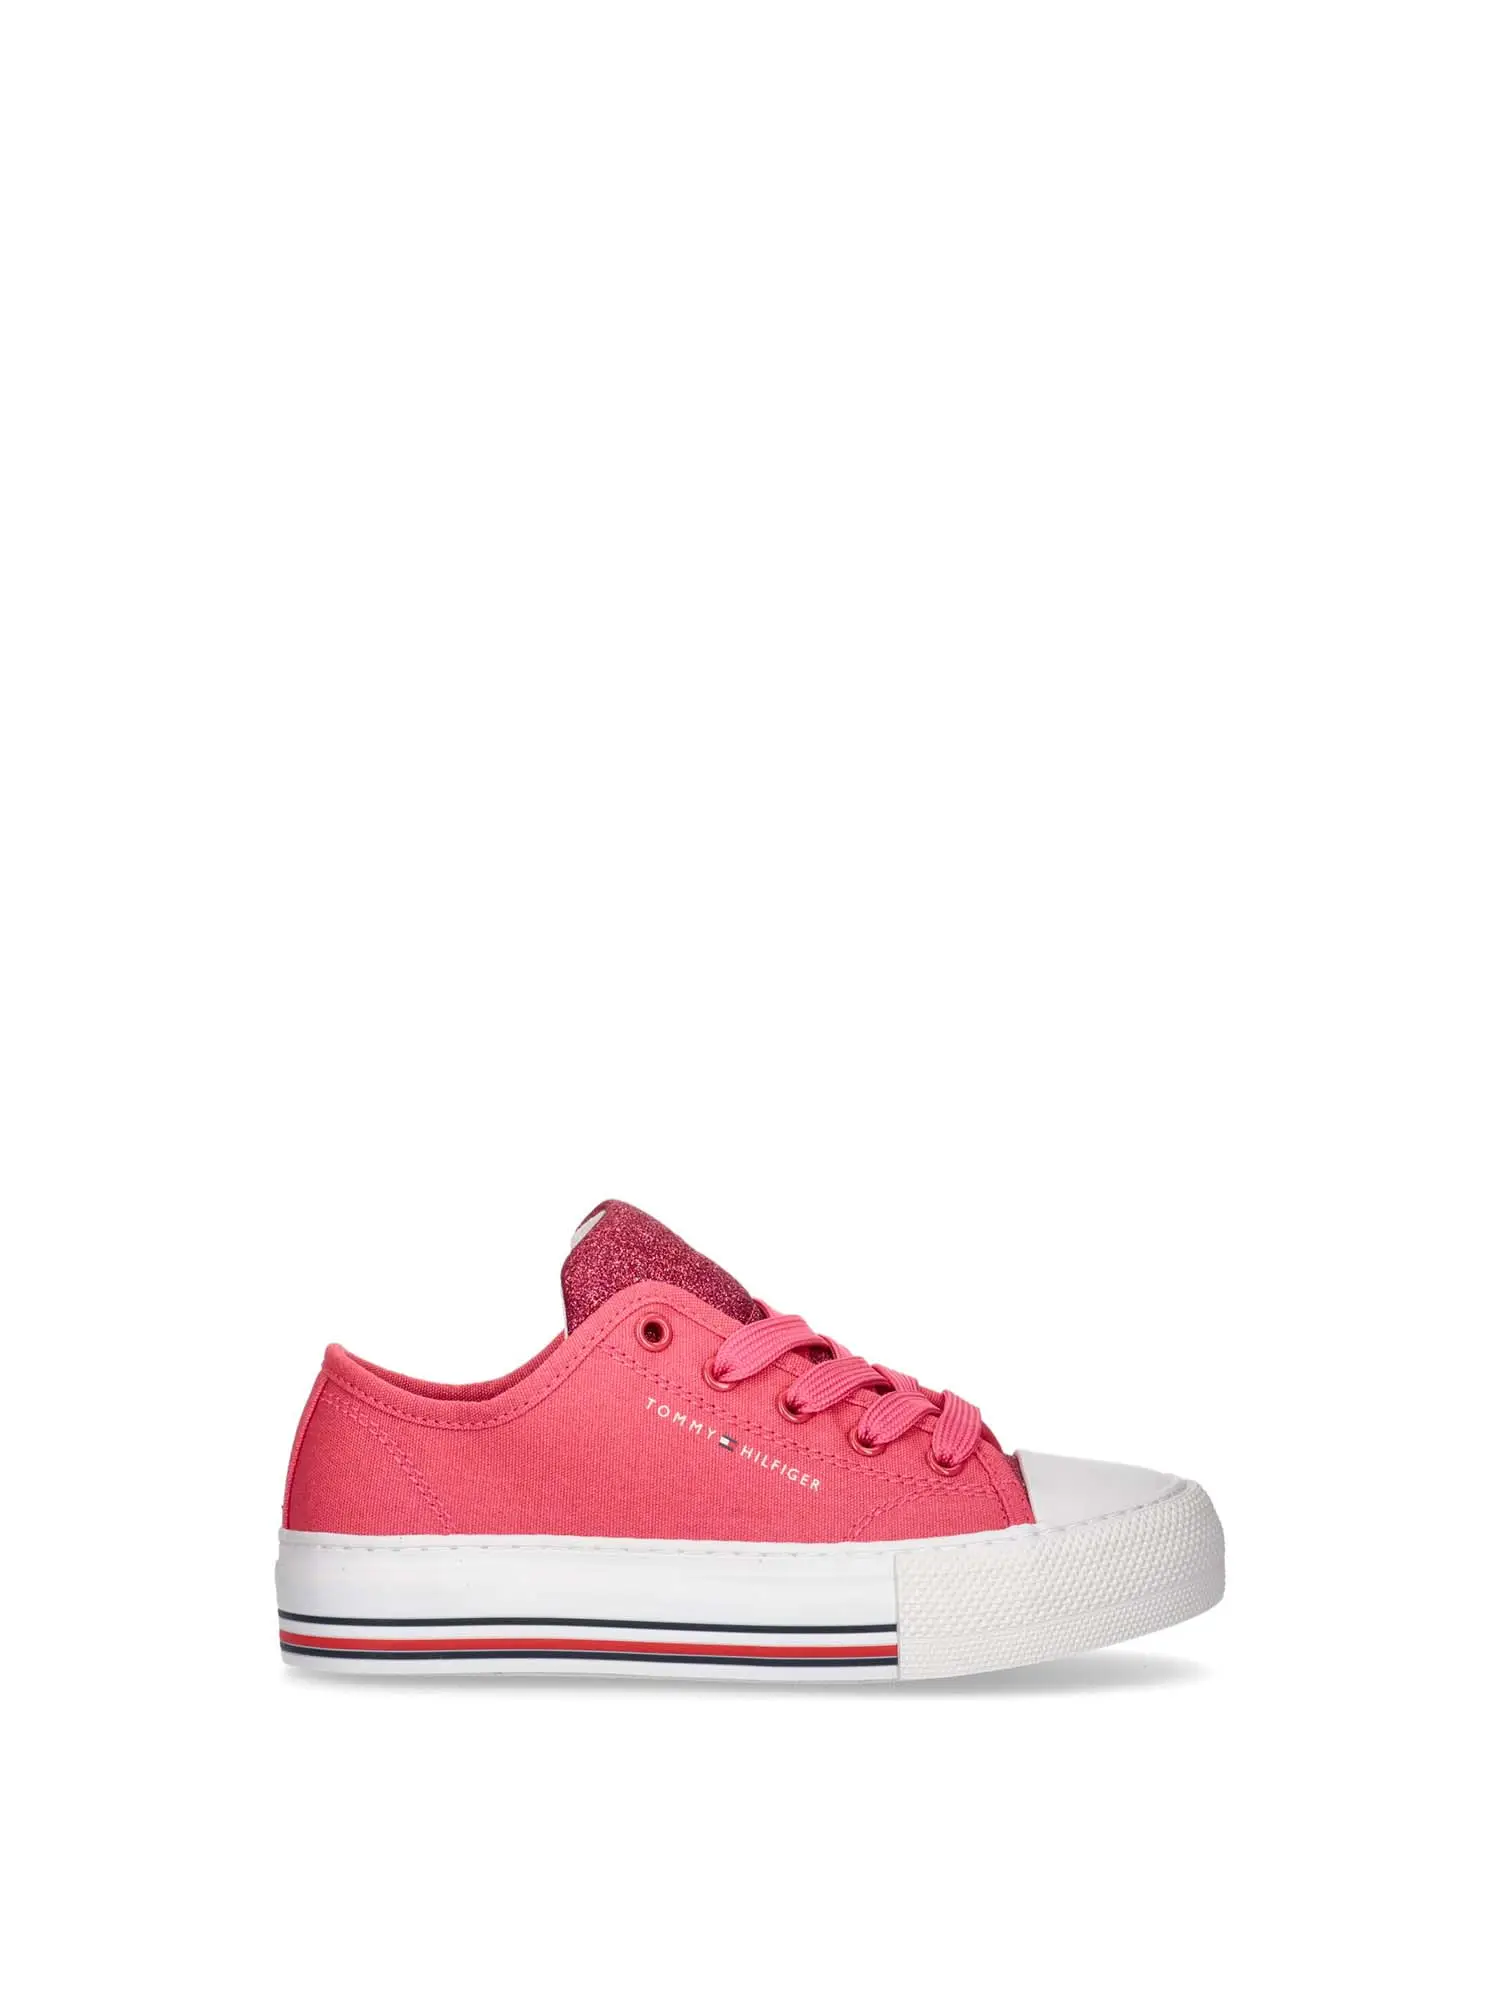 SNEAKERS RAGAZZA - TOMMY HILFIGER - T3A9-33185-1687 - FUXIA, 40